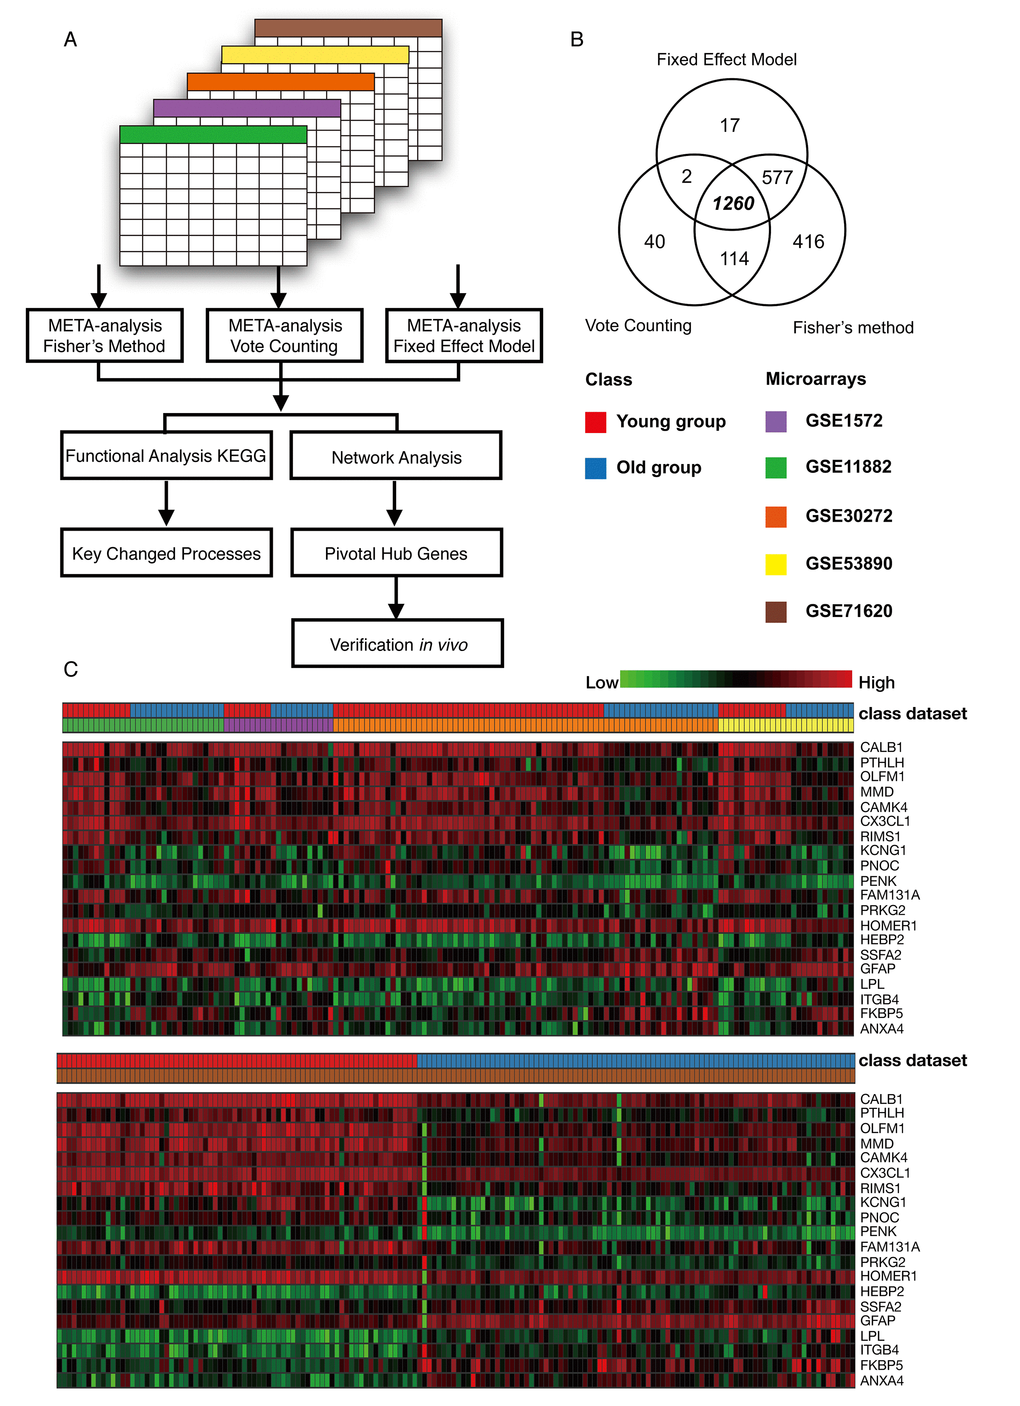 Meta-analysis of the frontal cortex throughout normal aging. (A) Flowchart of the meta-analysis. (B) Venn diagram of differentially expressed genes identified from the meta-analysis using Fisher’s method, the vote counting method and a fixed effect model. (C) Heat map representation of the top 20 differentially expressed genes across different microarrays identified from the meta-analysis (row-wise comparison).